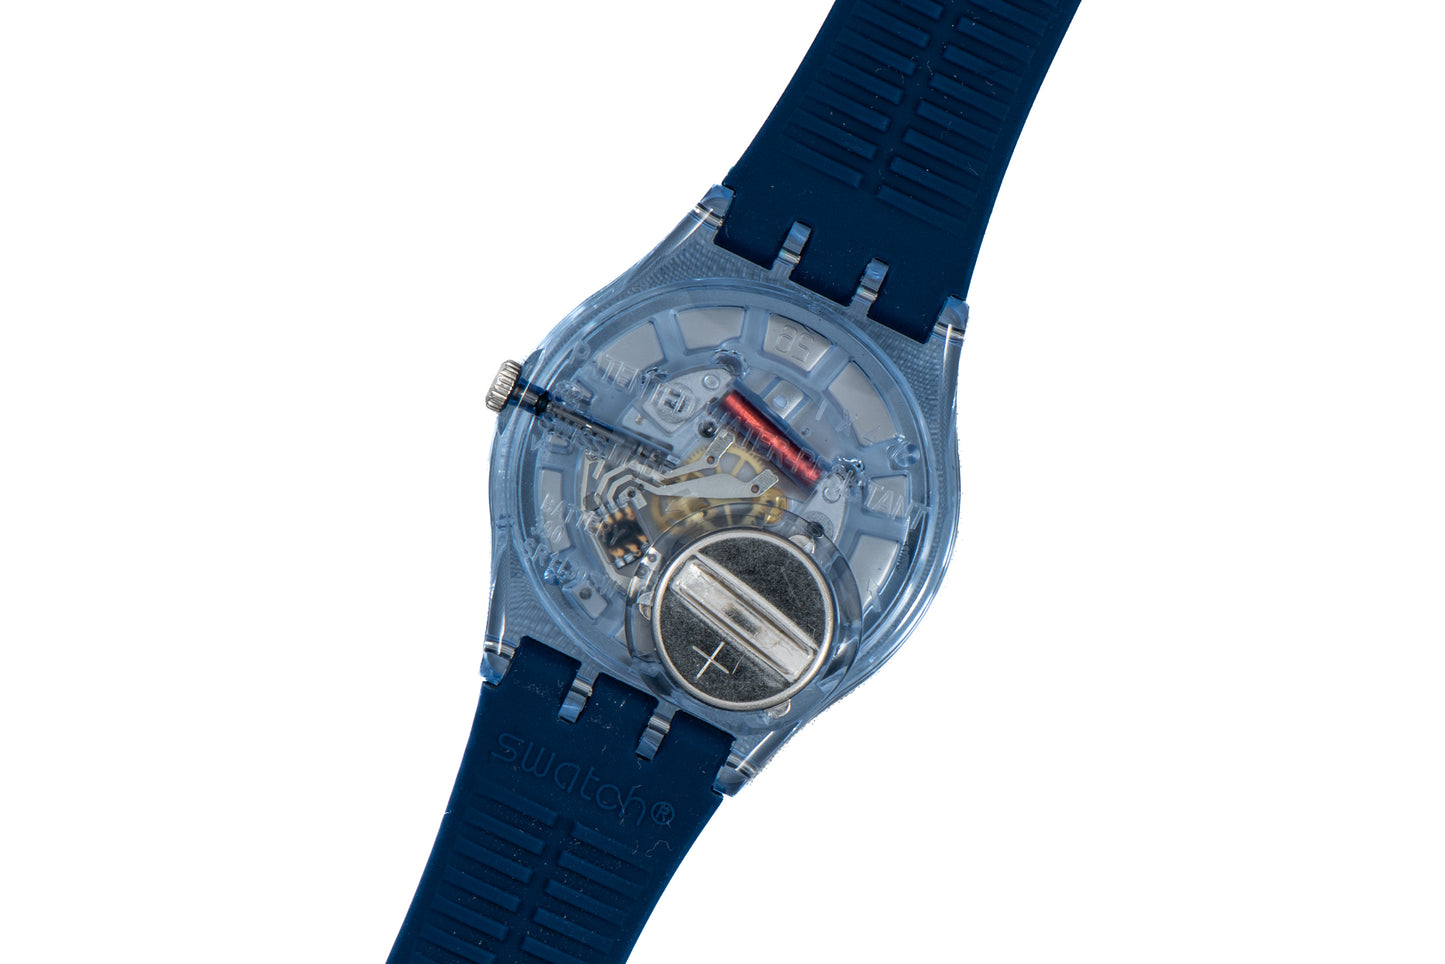 SWATCH License To Kill 2020 James Bond Collection